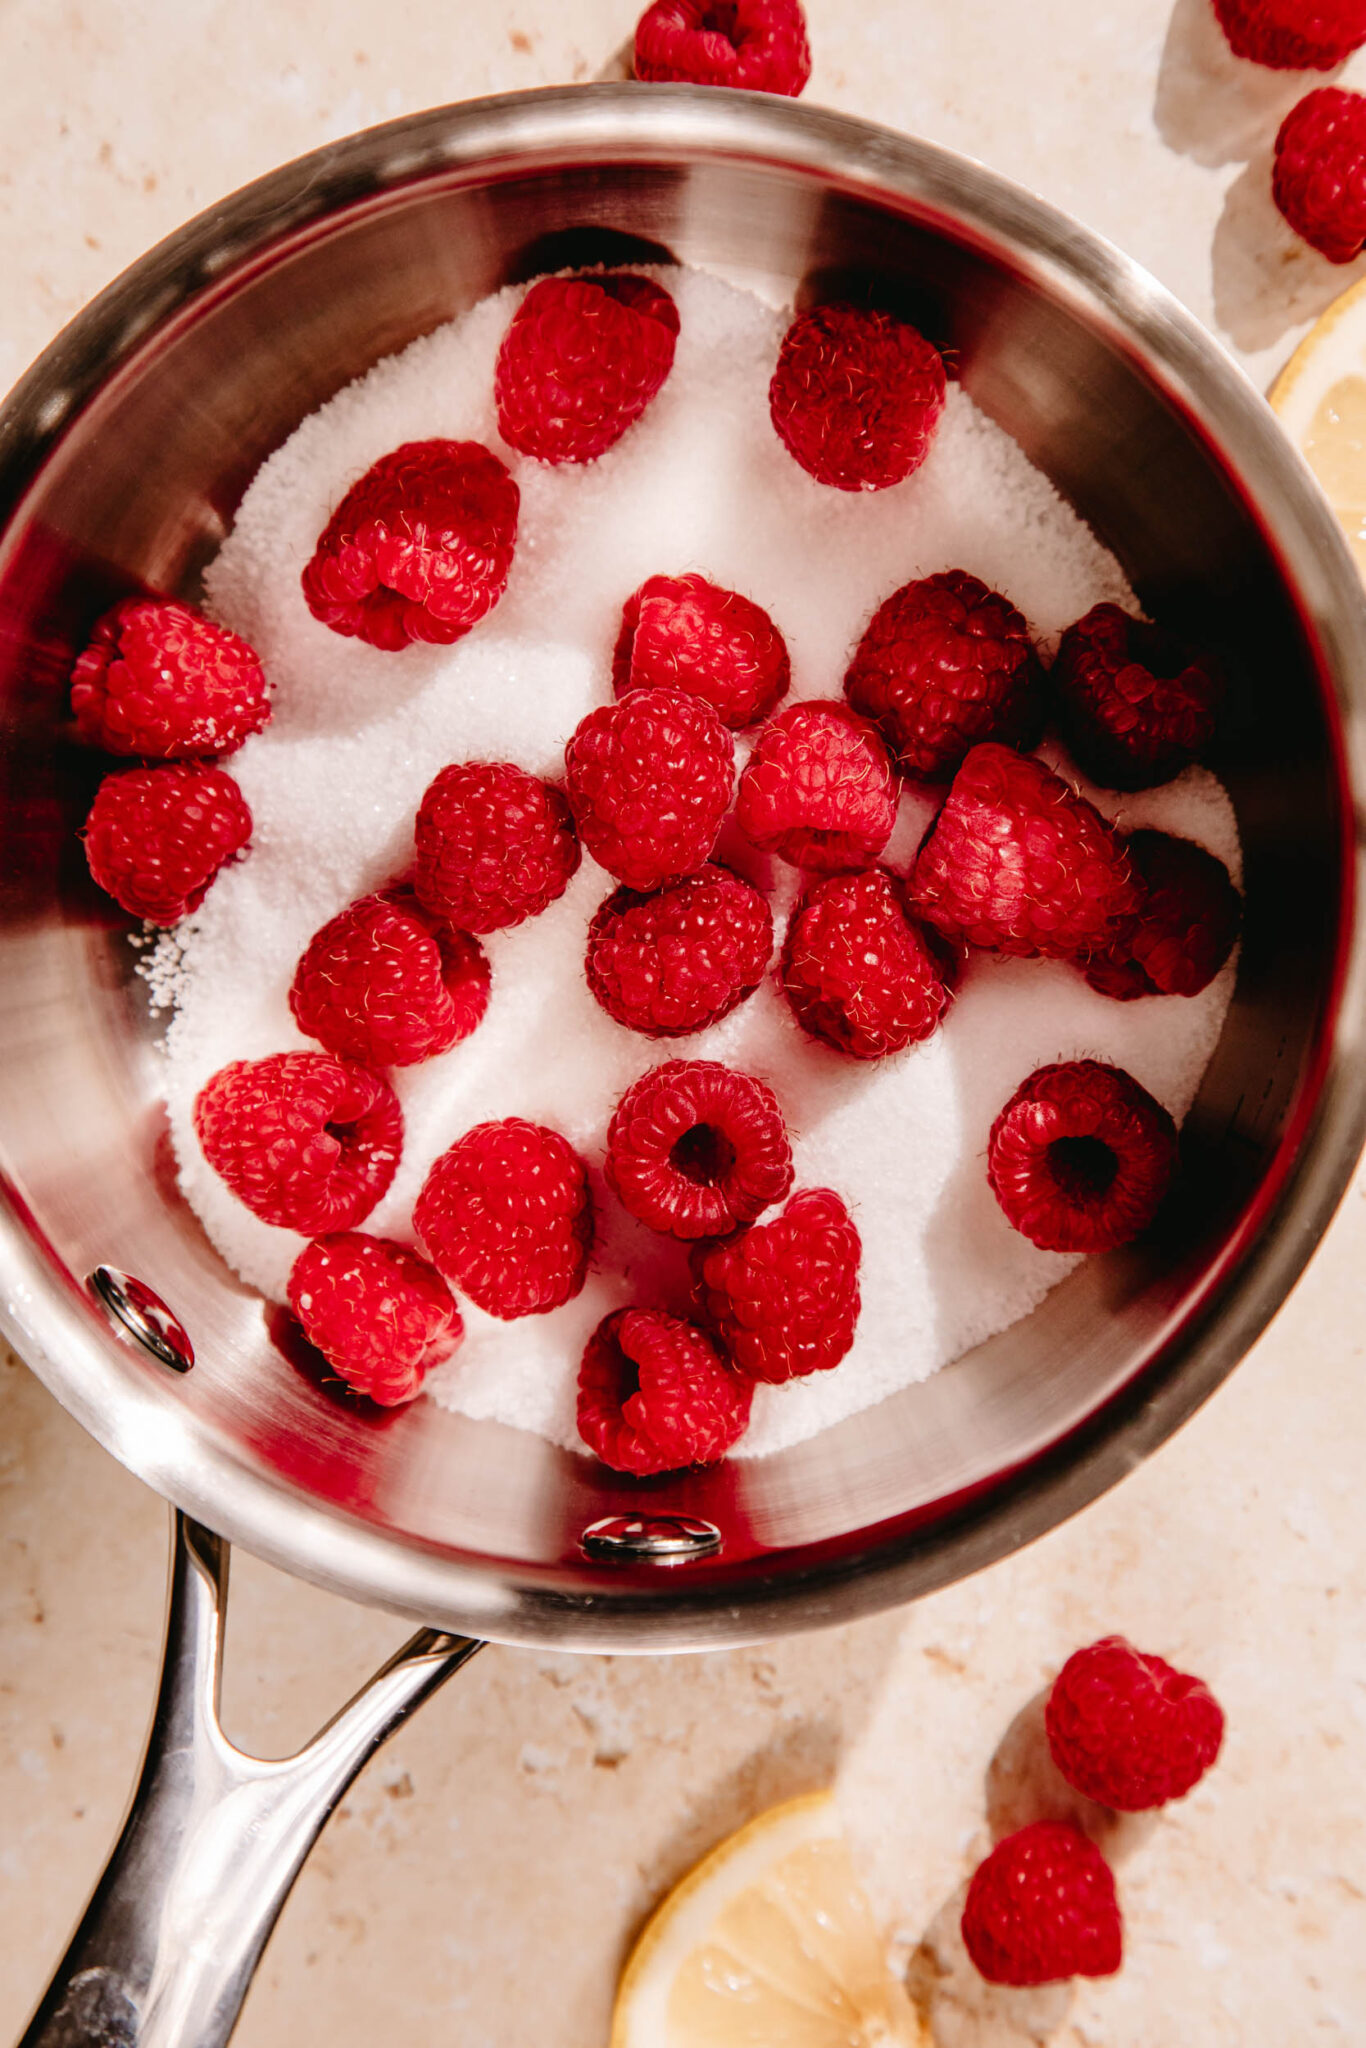 A small sauce pan filled with granulated sugar and fresh berries, on a beige backdrop.